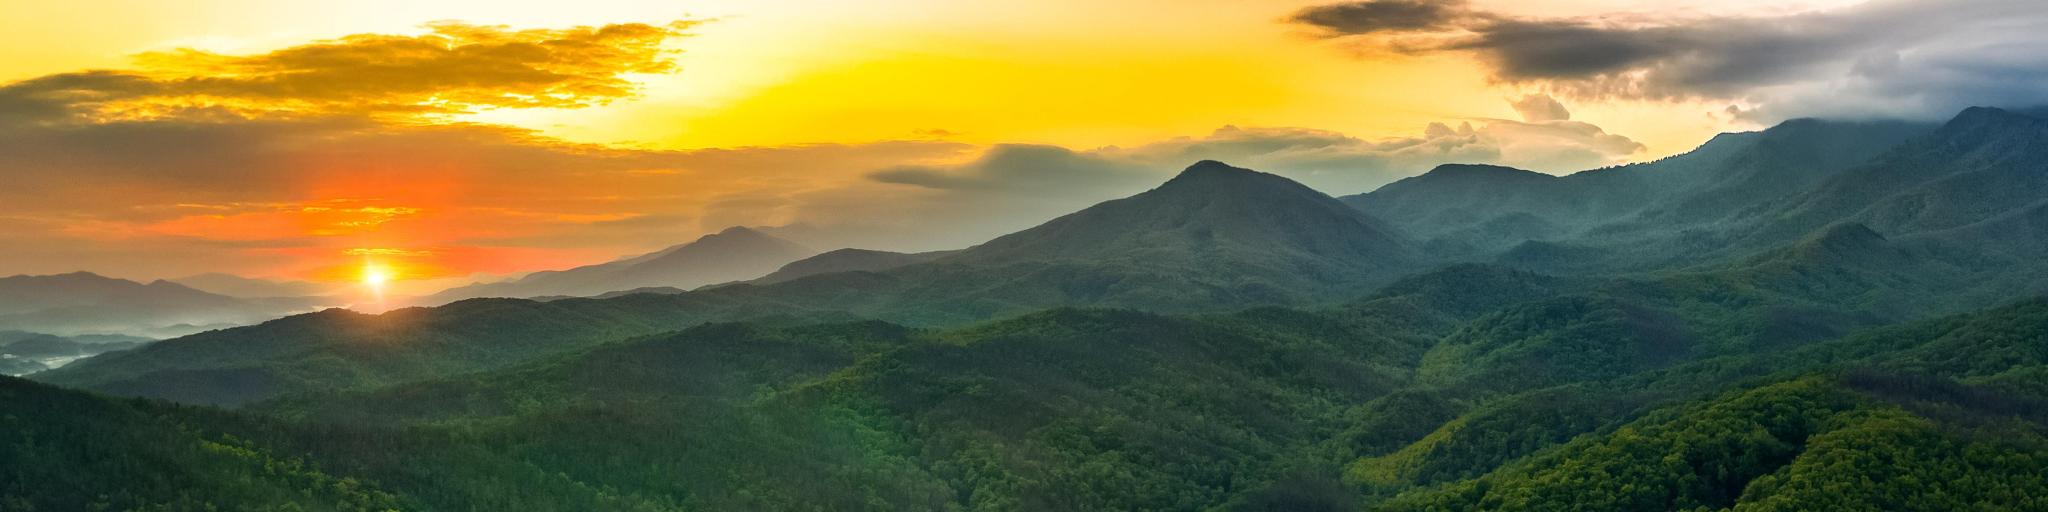 Wide view of the stunning scenery of the Great Smokey Mountains at sunset.